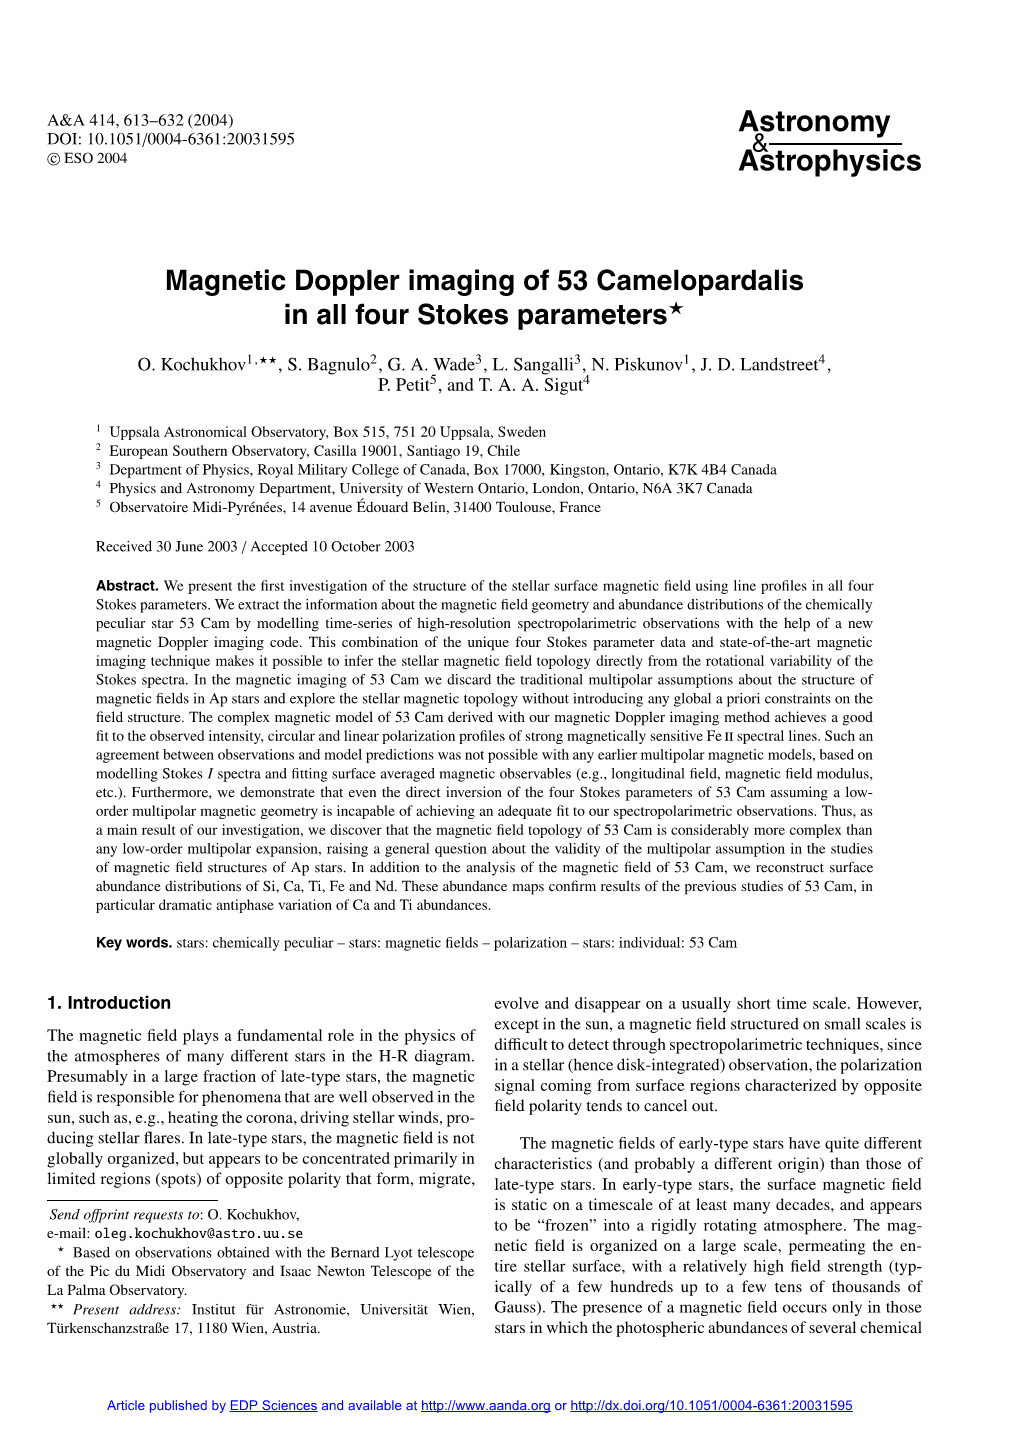 Magnetic Doppler Imaging of 53 Camelopardalis in All Four Stokes Parameters